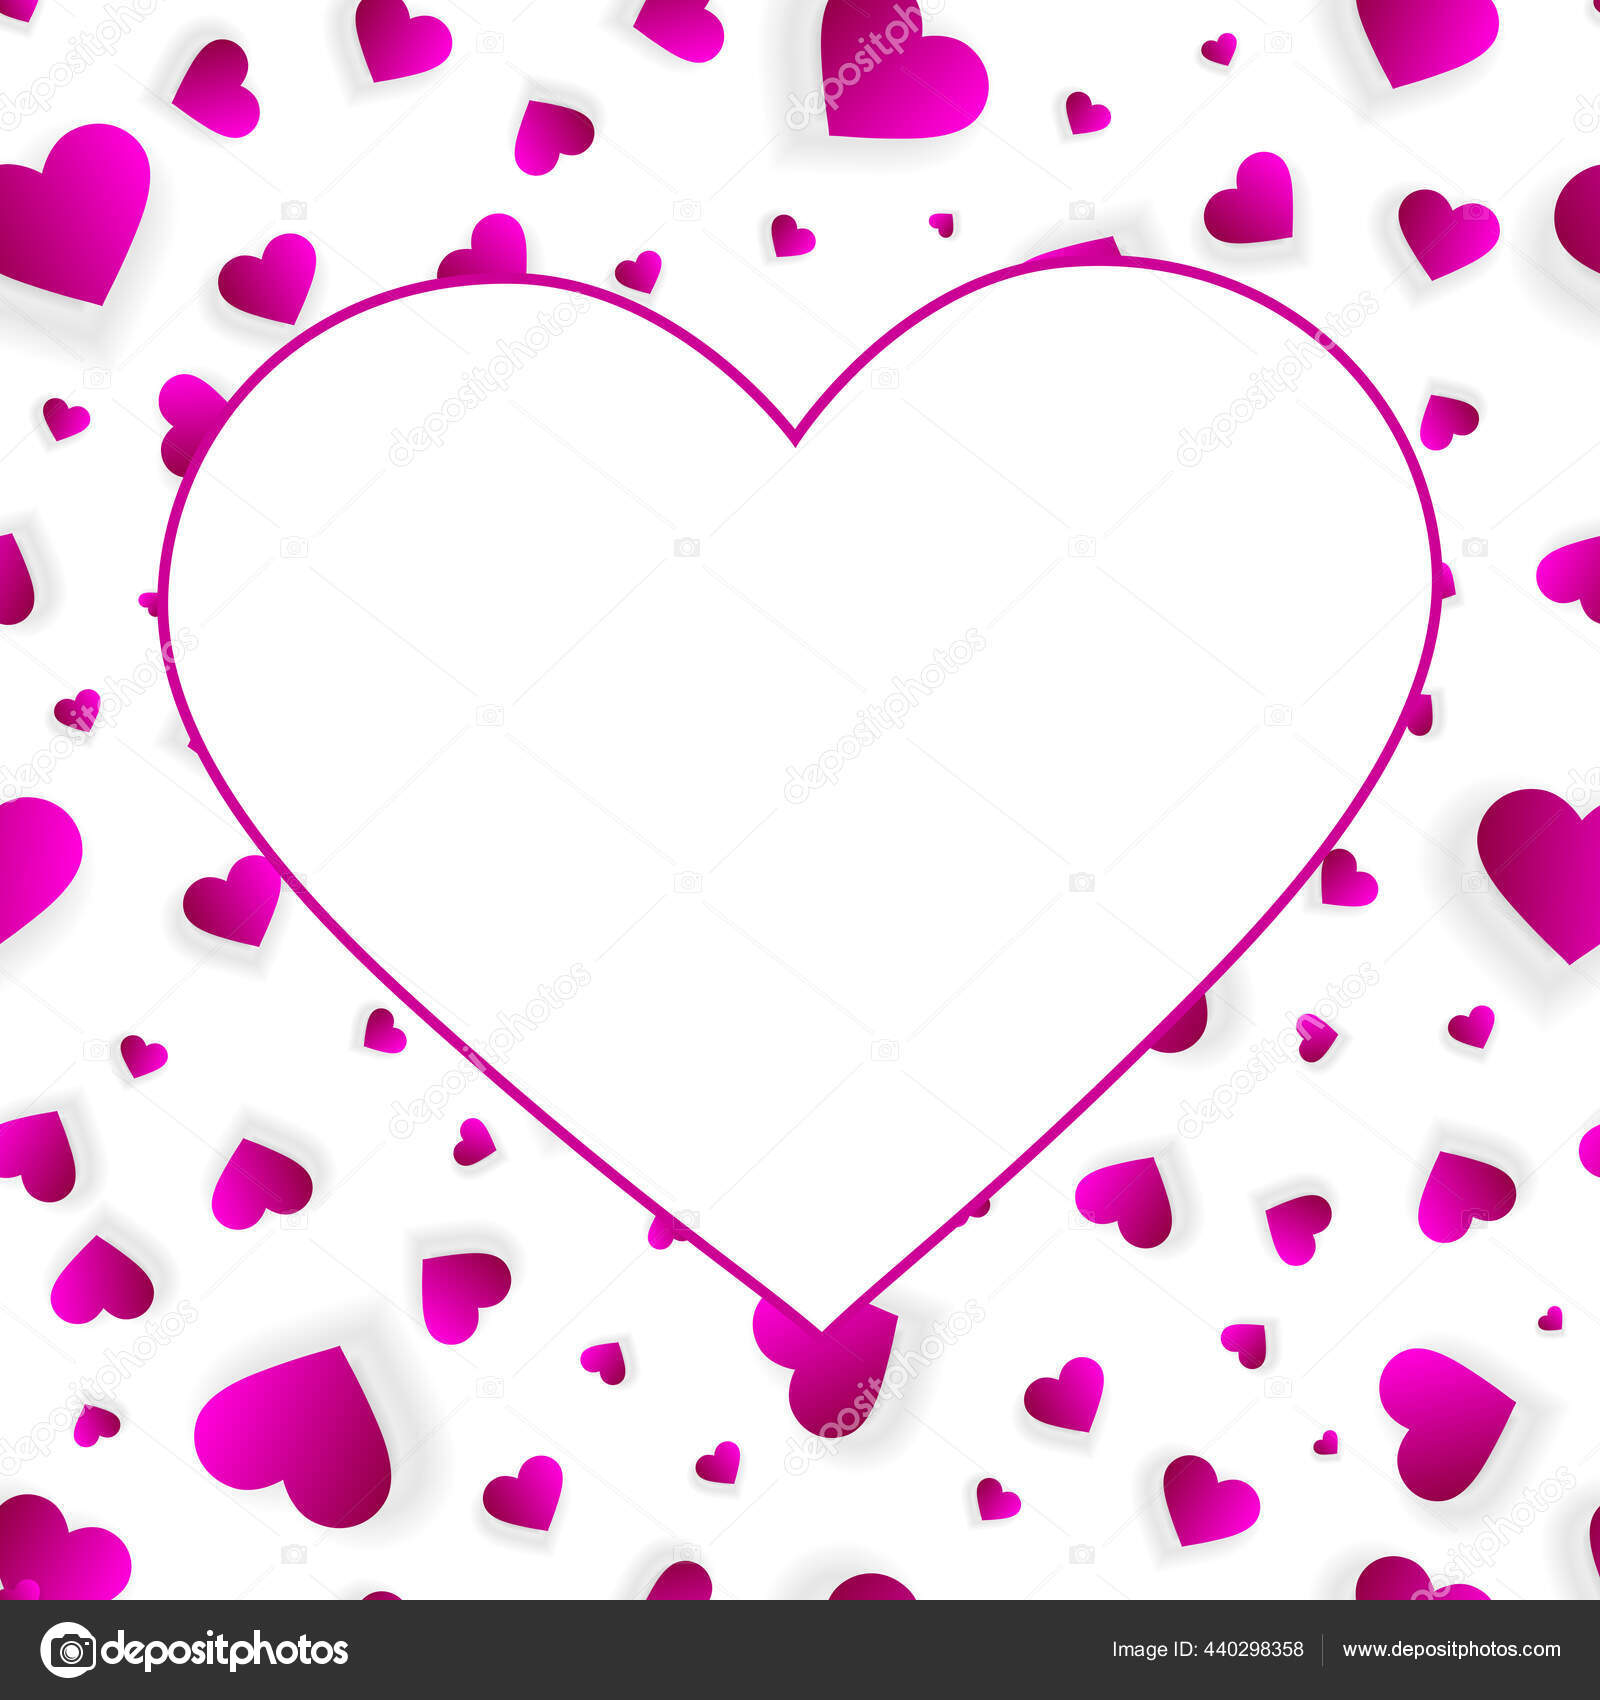 Lovely heart frame with confetti hearts By Microvector